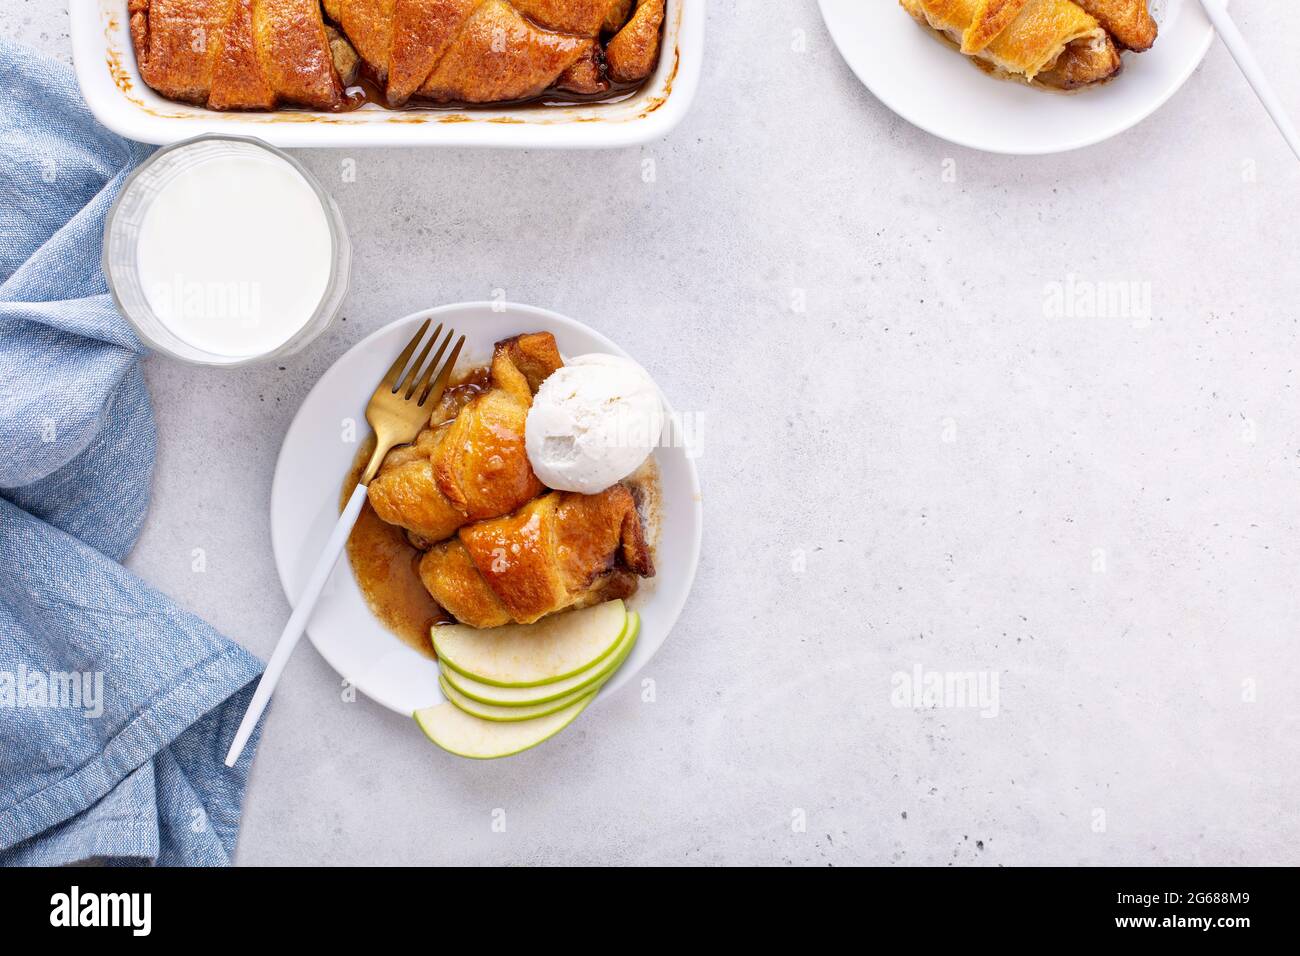 Apple dumplings in flaky pastry with caramel sauce Stock Photo